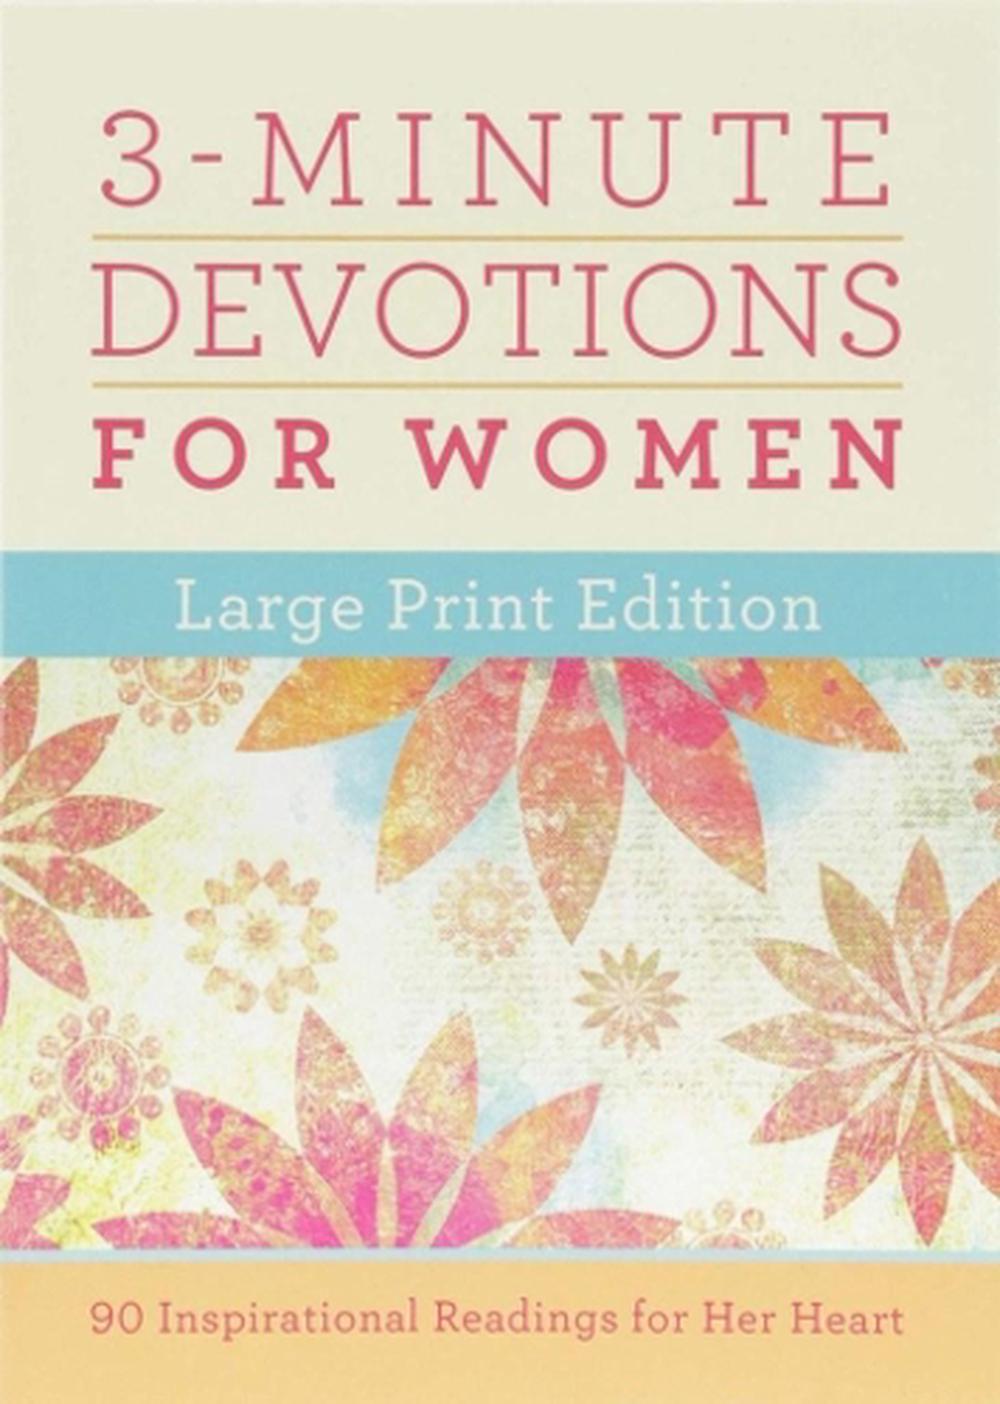 3Minute Devotions for Women Large Print Edition 90 Inspirational